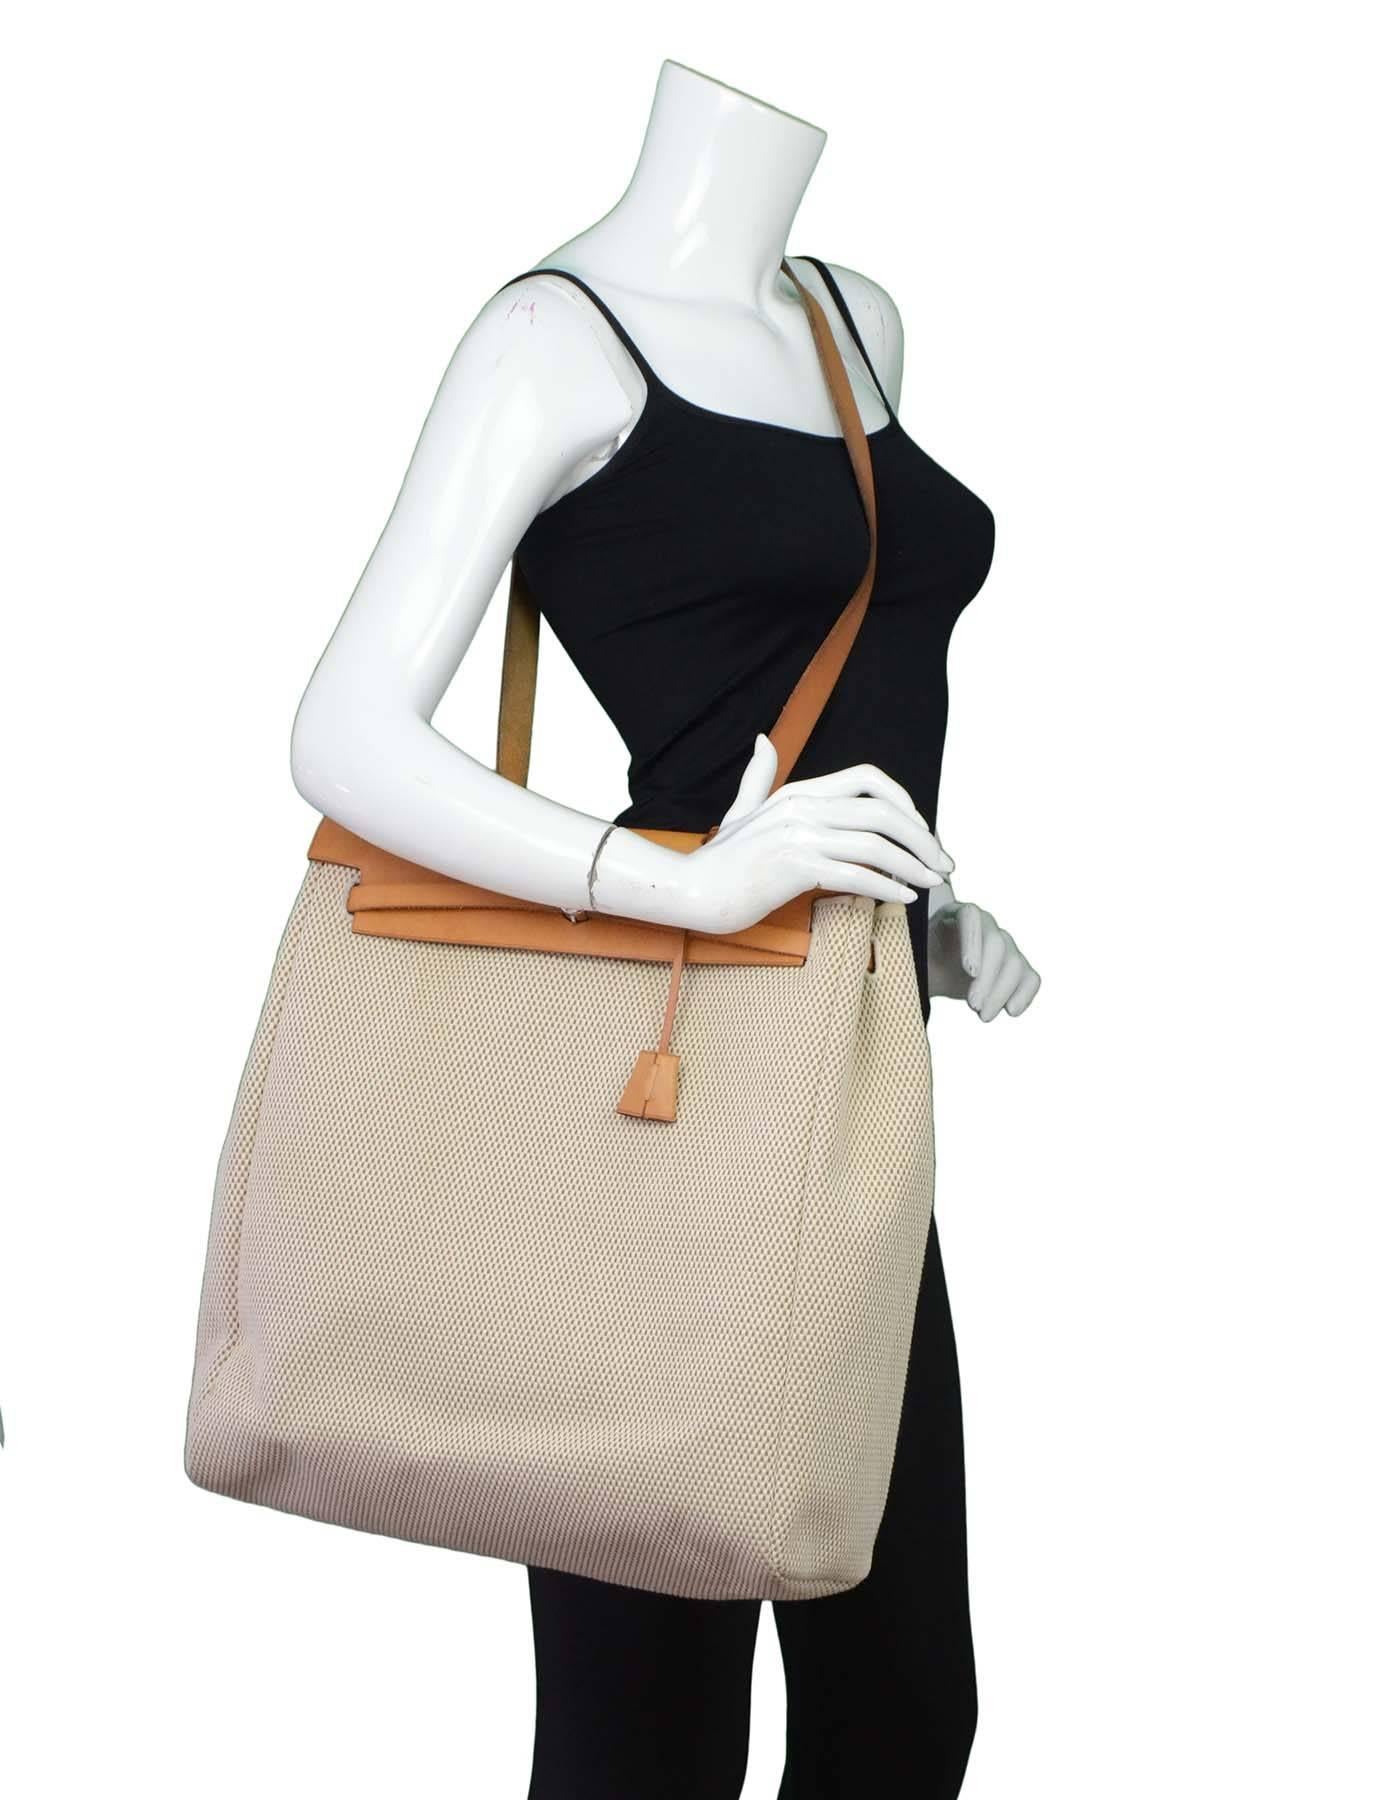 Hermes Tan and Beige Toile Two-in-One Herbag

Made in: France
Year of Production: 2001
Color: Tan and beige
Hardware: Palladium
Materials: Leather and canvas
Lining: None
Closure/opening: Flap top with pull closure
Exterior Pockets: